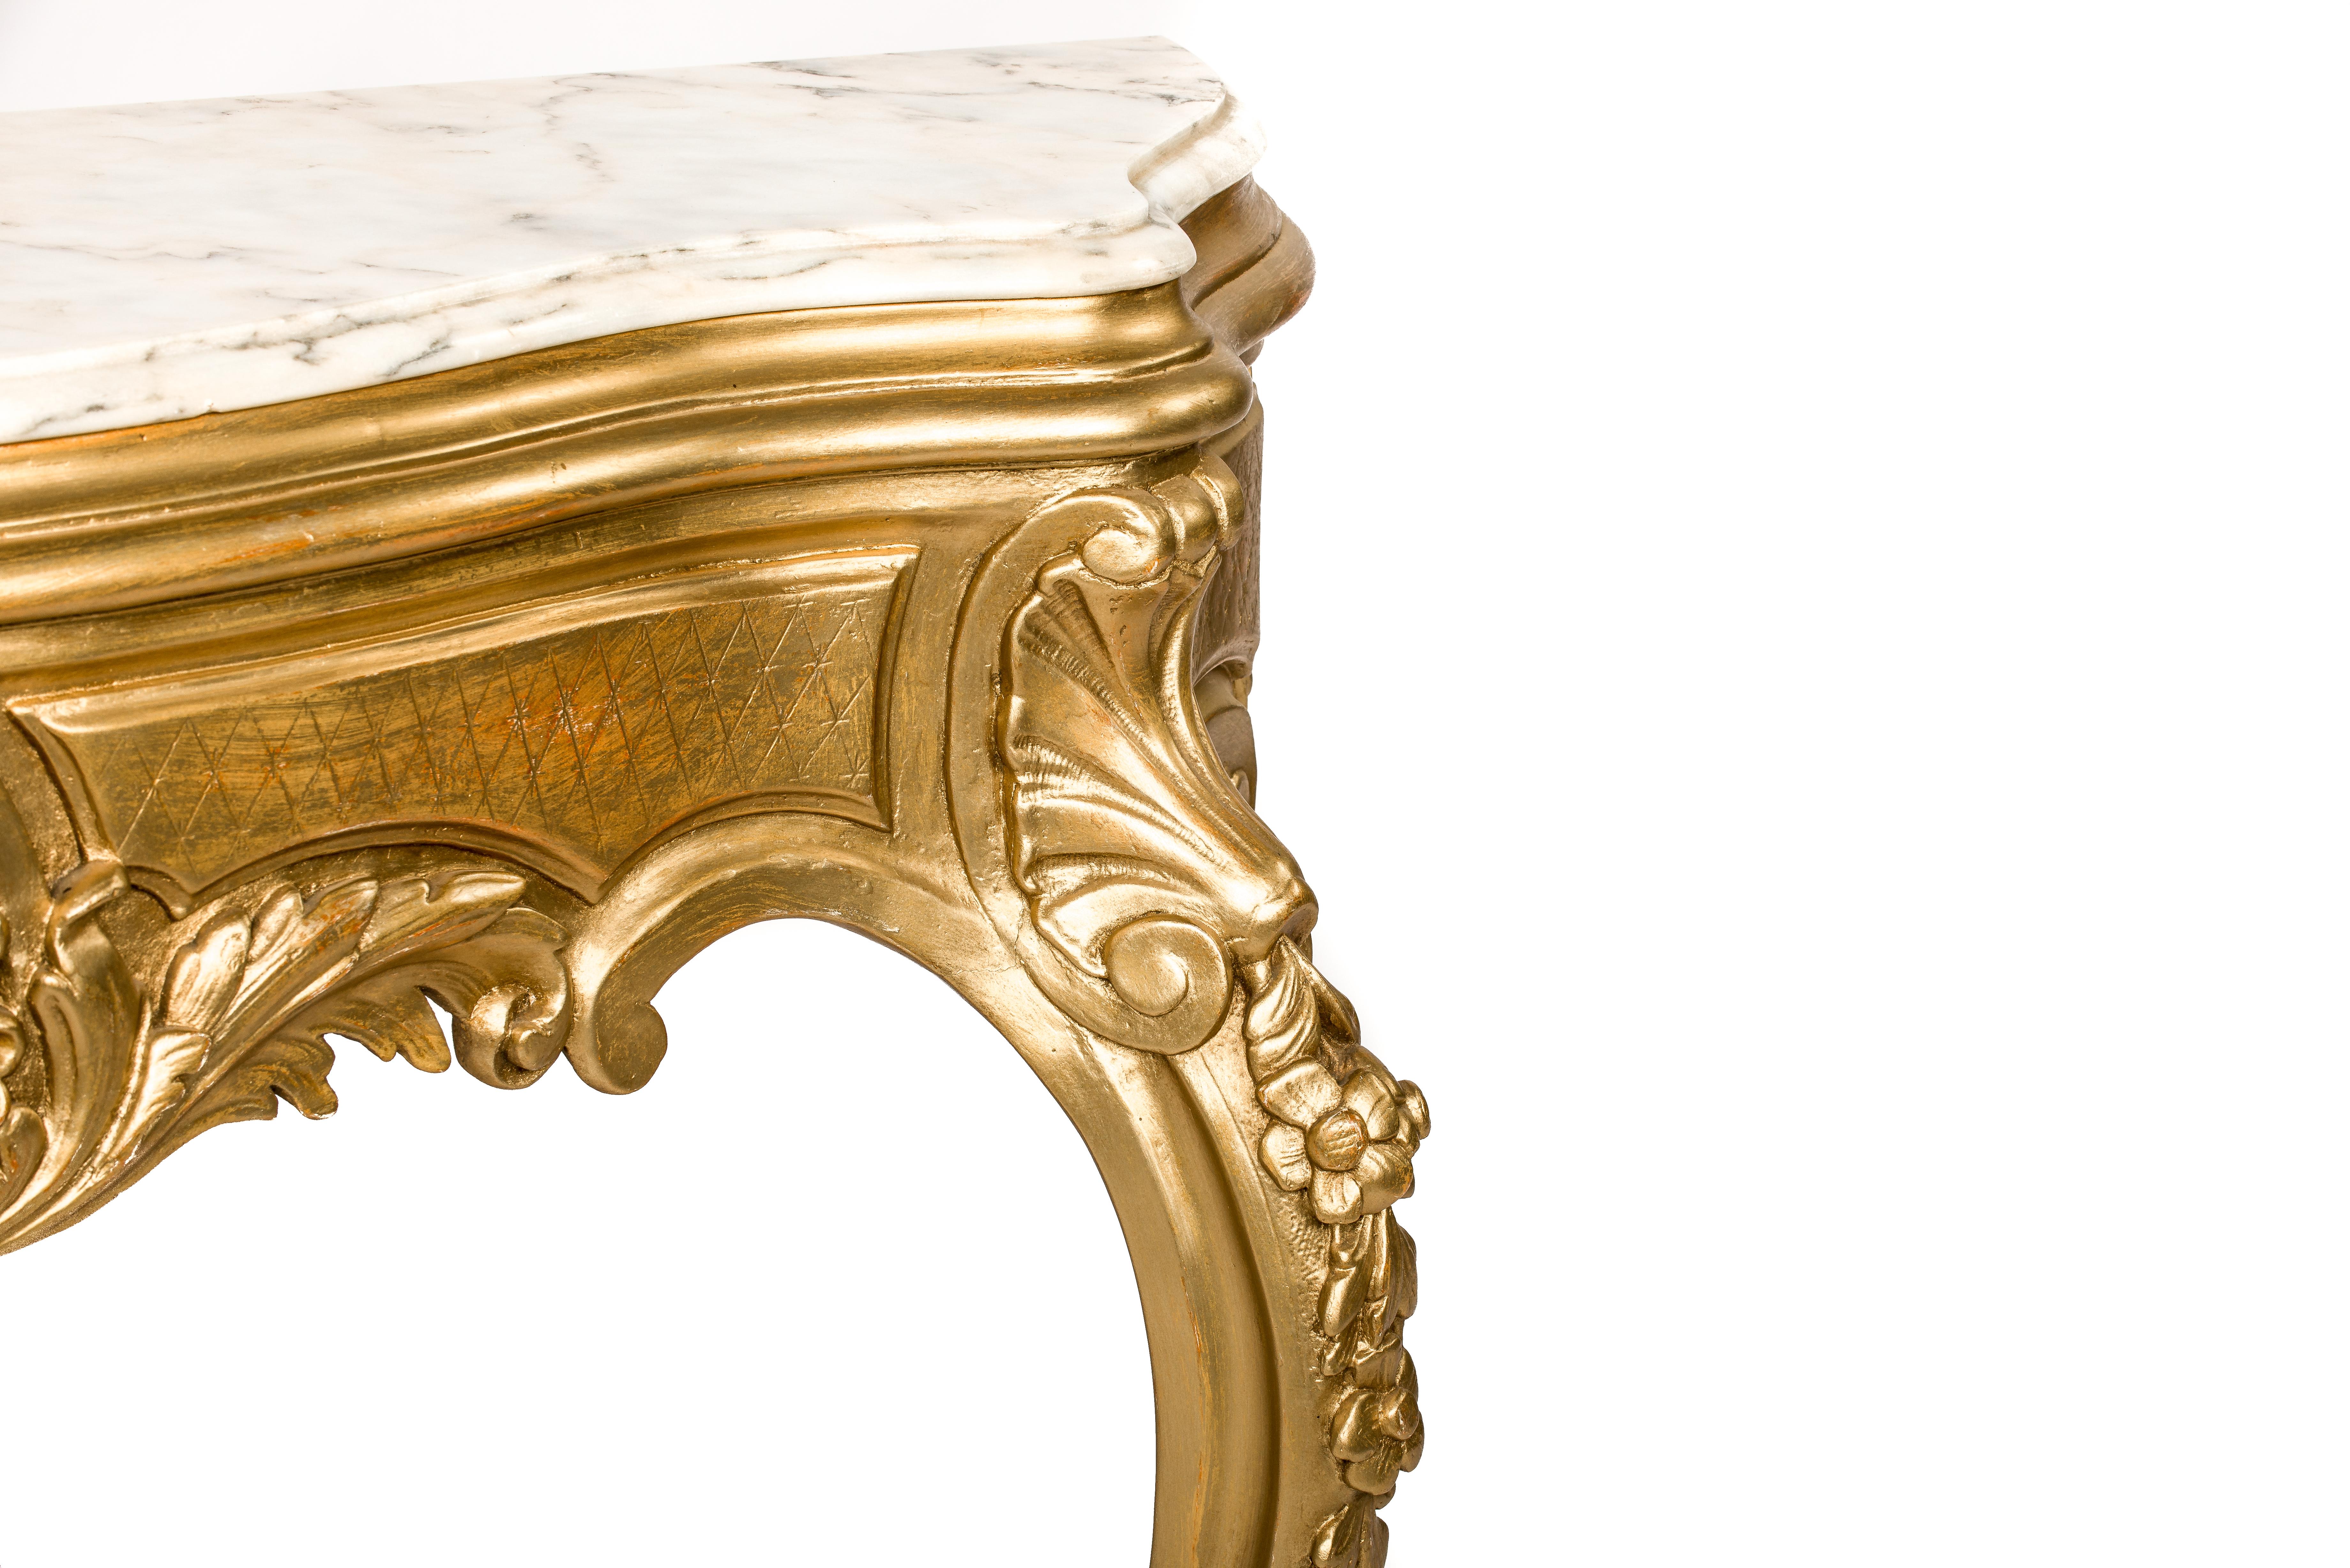 Polished Antique 19th century French Gold Baroque Console Table,  Bianca Rosa Marble Top For Sale